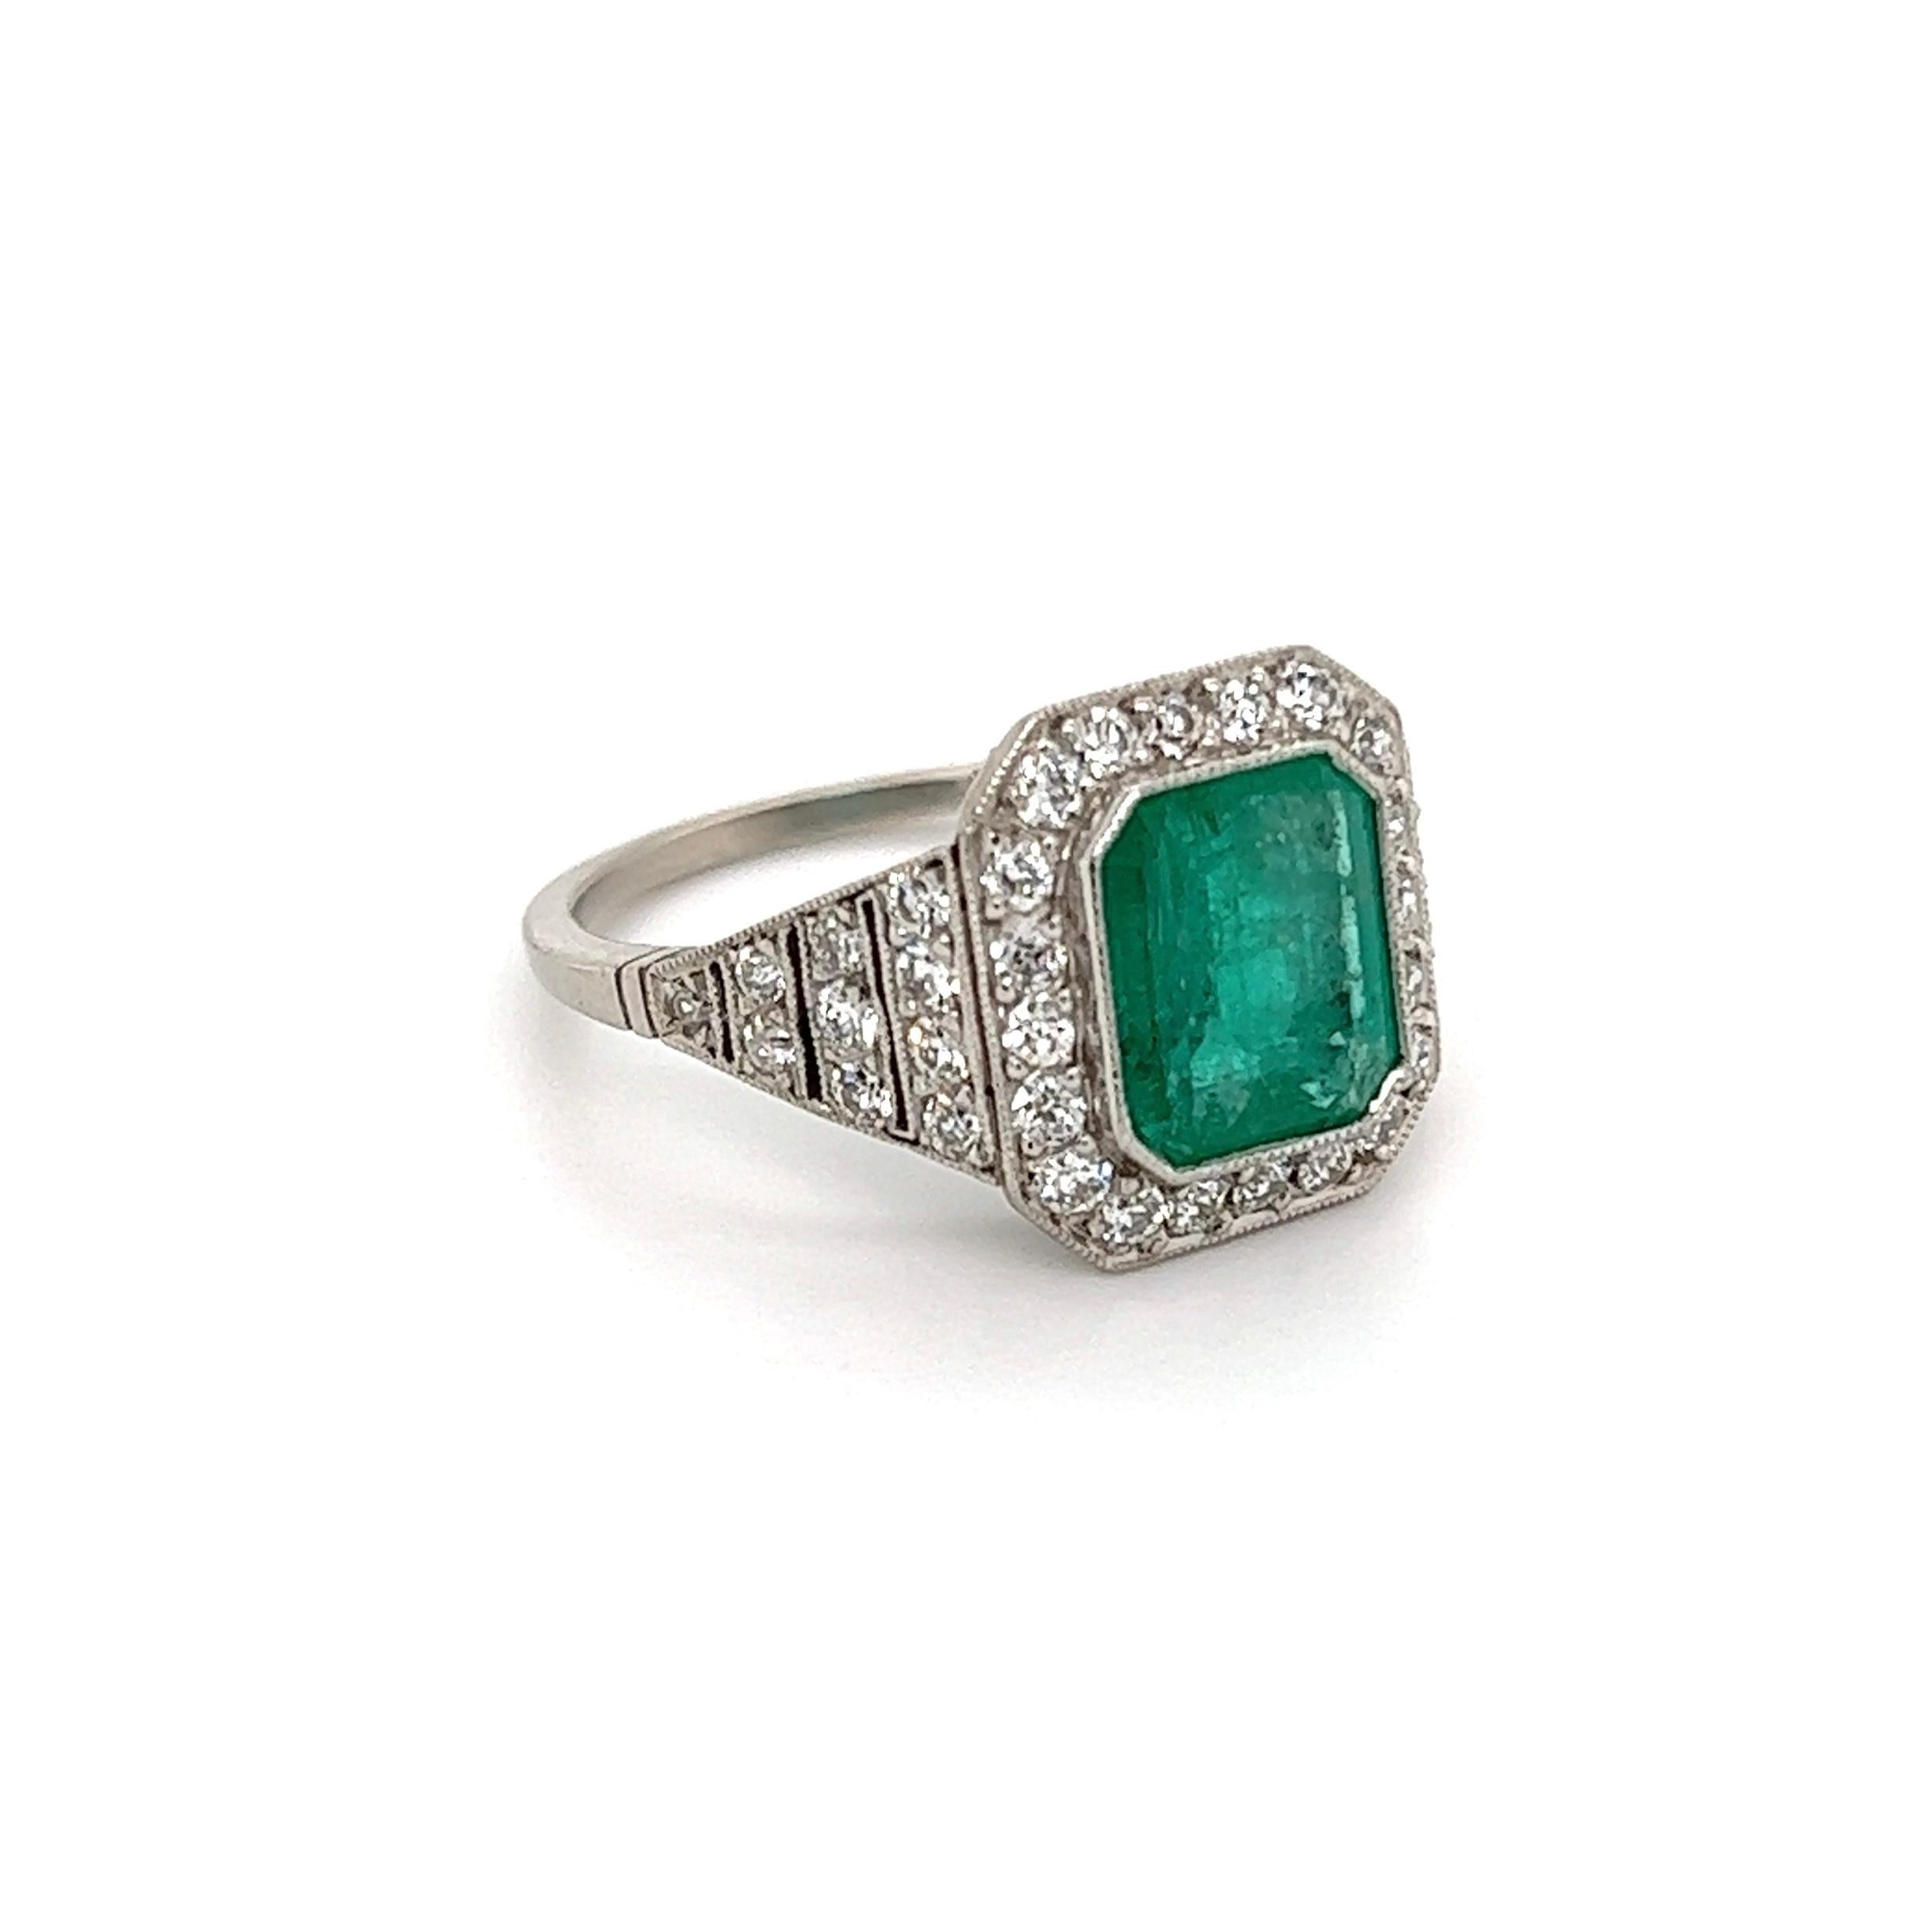 Simply Beautiful! Finely detailed Emerald and Diamond Cocktail Ring, center securely set with an Emerald-Cut Emerald weighing approx. 1.55 Carat surrounded by 40 Old European-Cut Diamonds weighing approx. 0.60tcw. Approx. Dimensions: 0.91” L x 0.75”